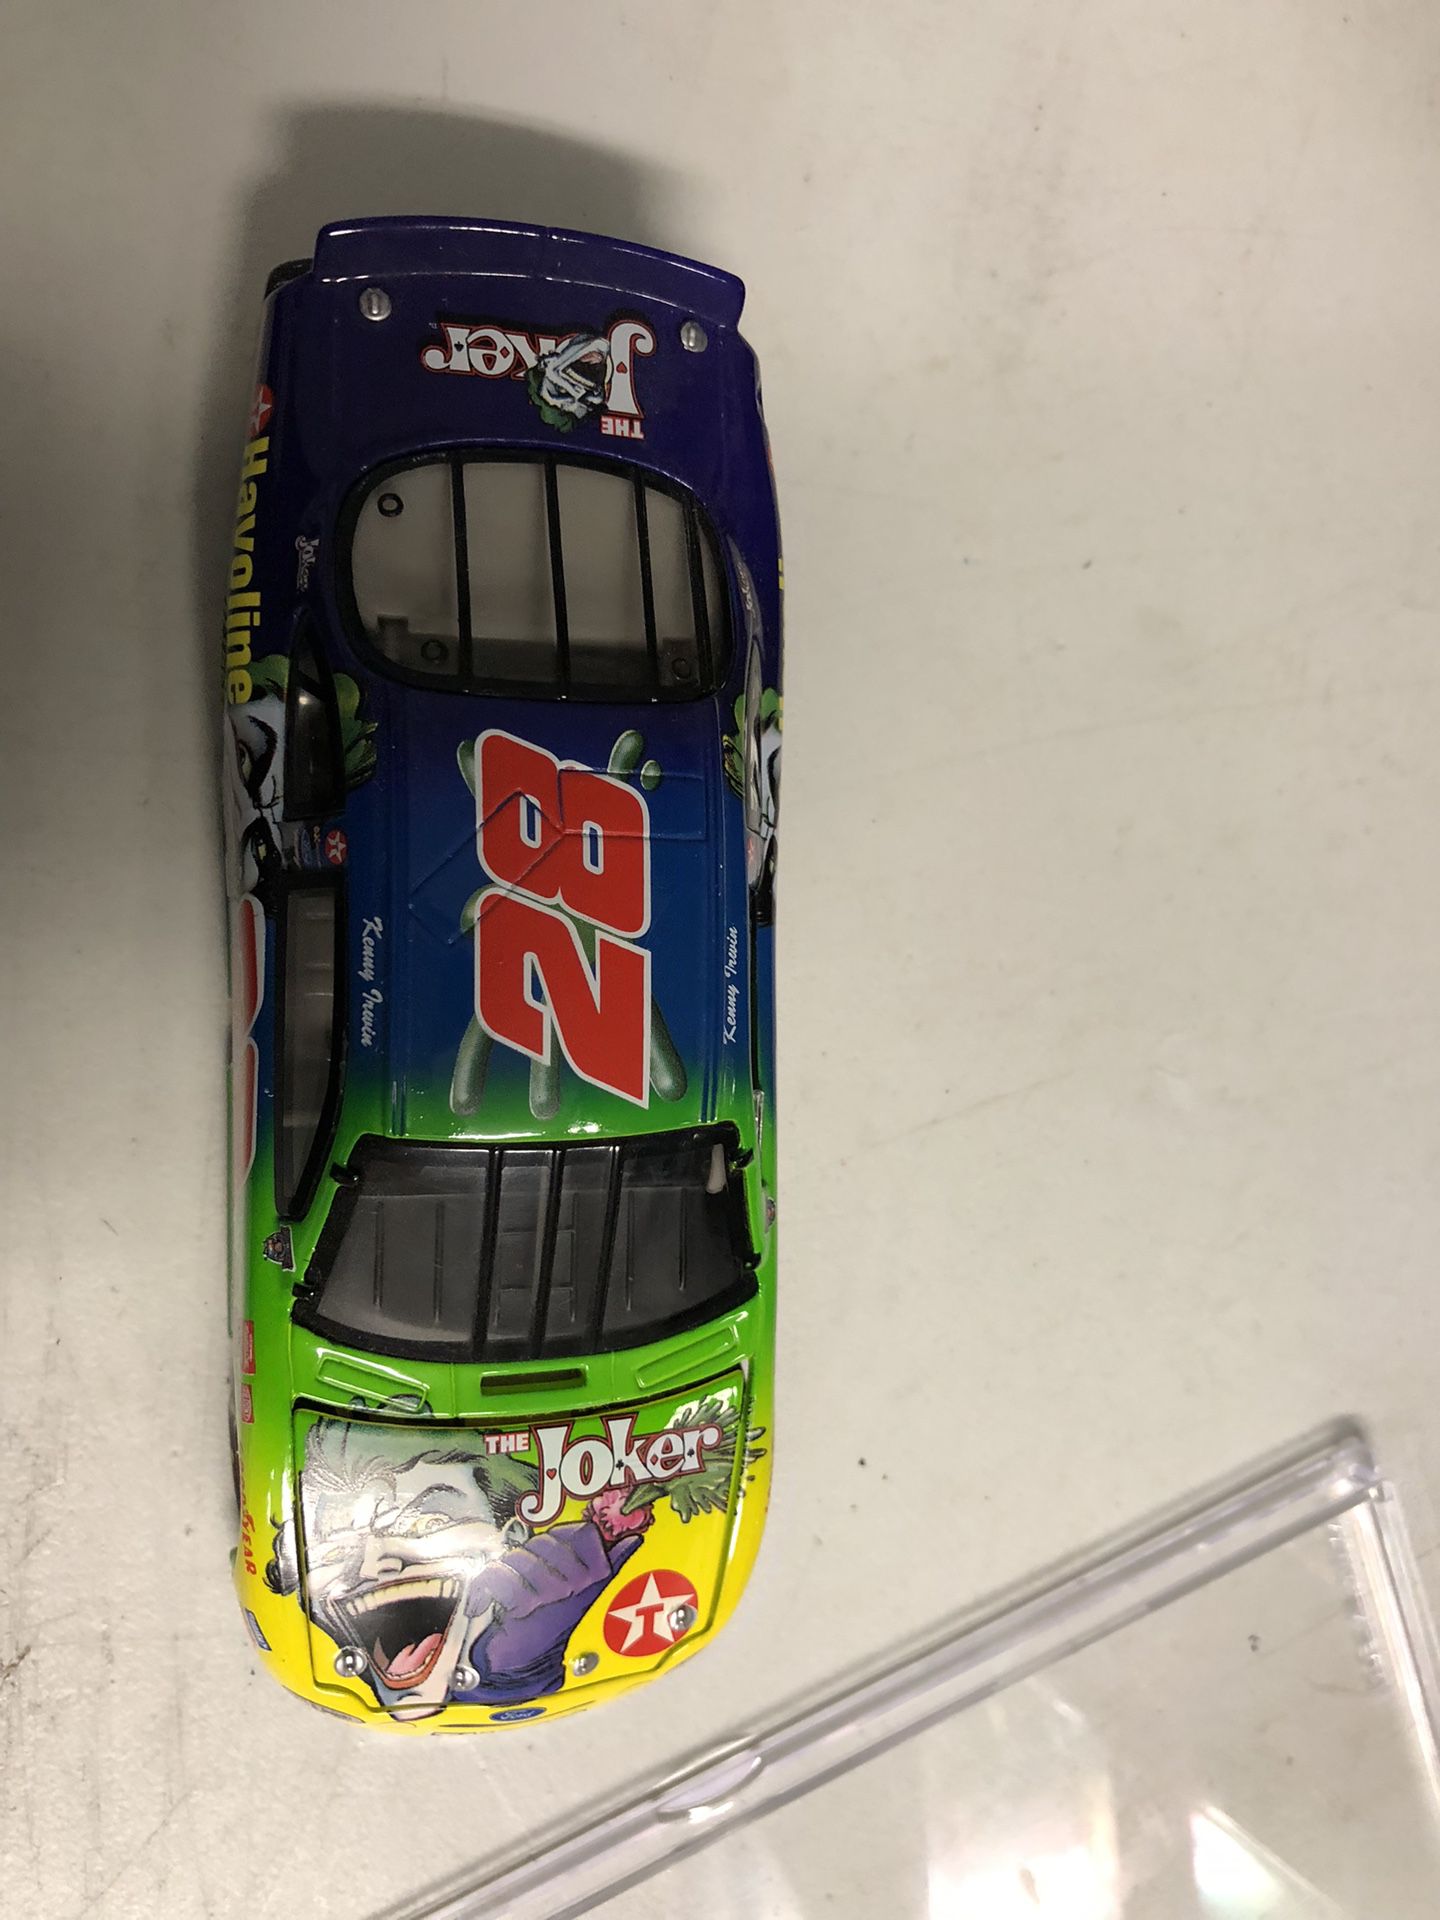 The Joker #28 Kenny Irwin 1:24 Scale Stock Car Limited Edition.